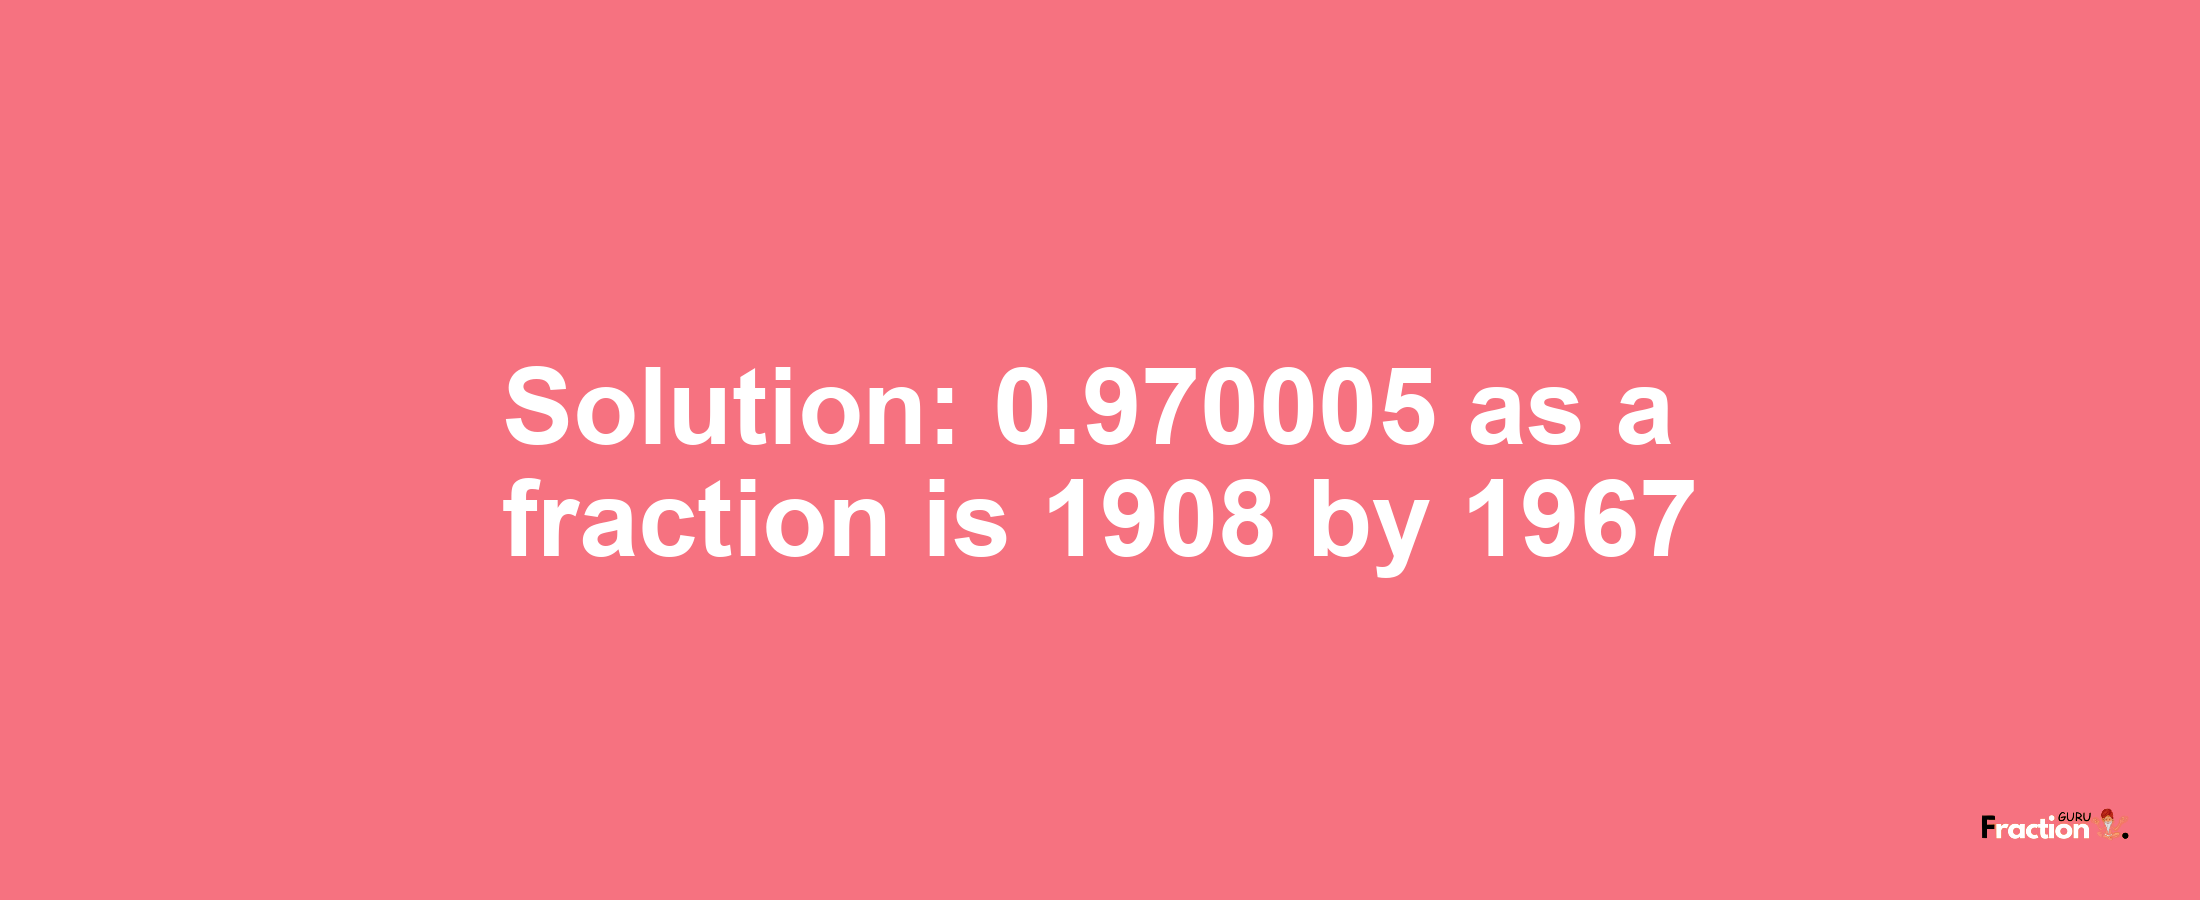 Solution:0.970005 as a fraction is 1908/1967